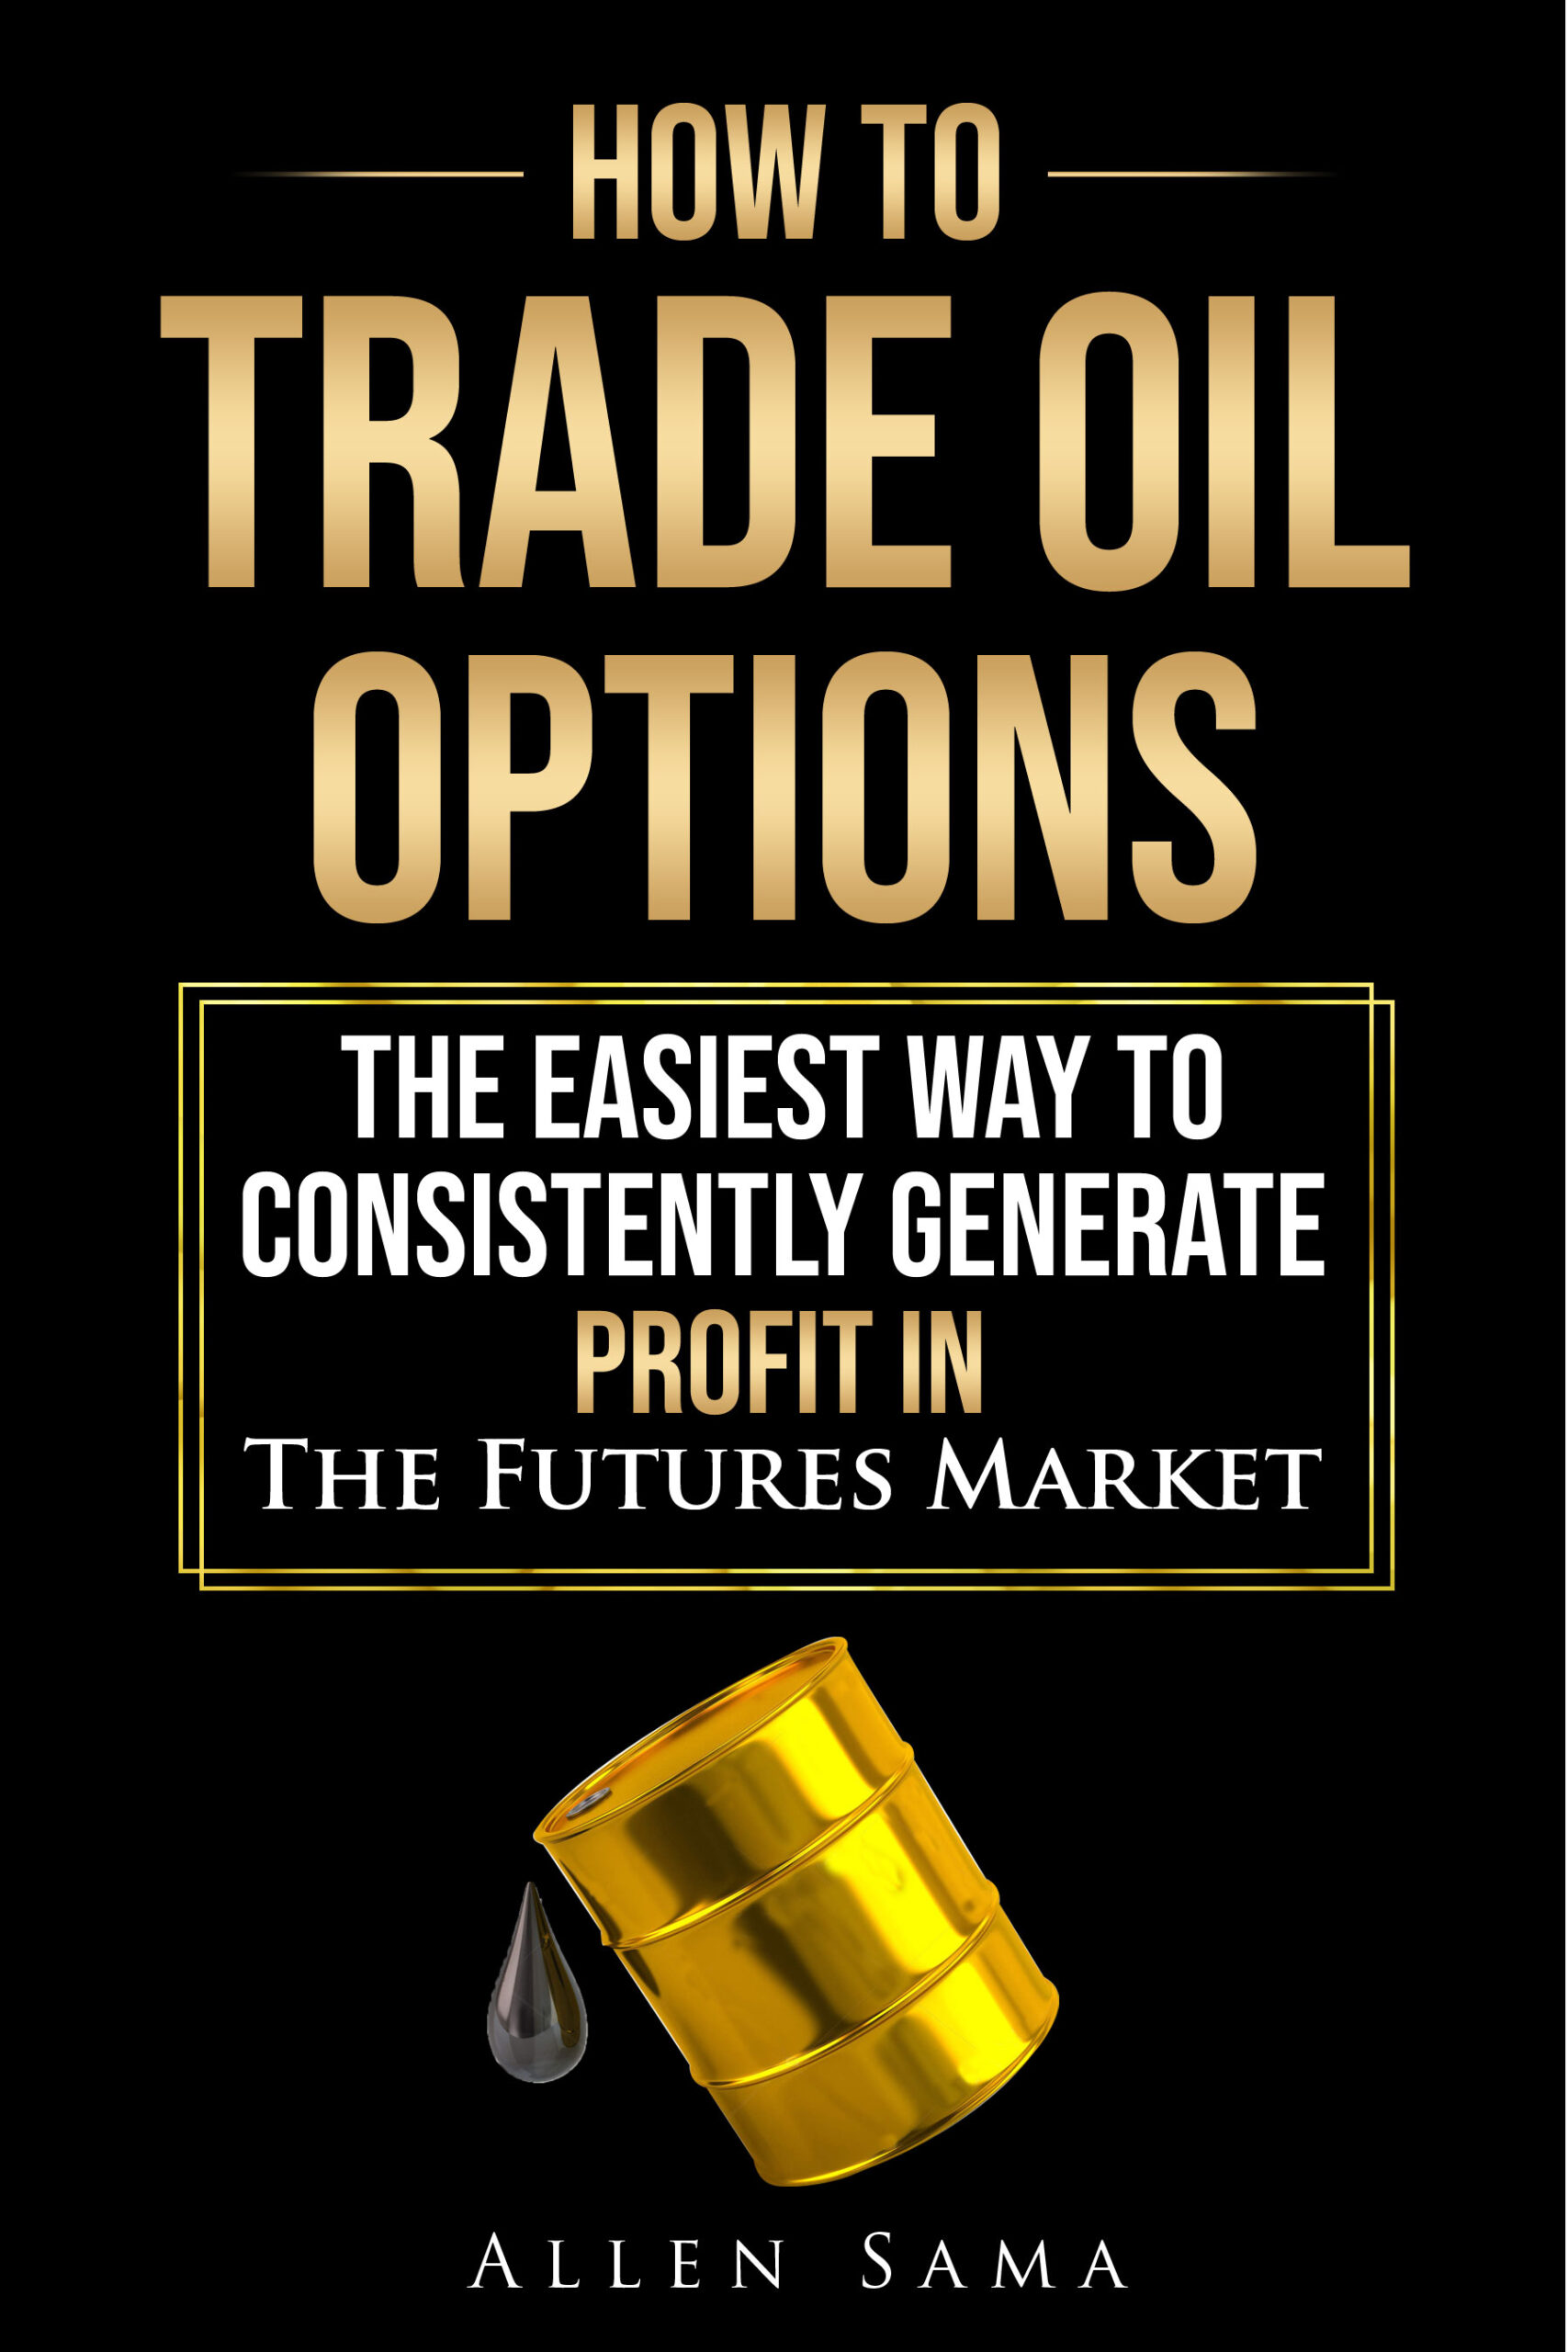 FREE: How To Trade Oil Options: The Easiest Way To Consistently Generate Profit In The Futures Market by Allen Sama